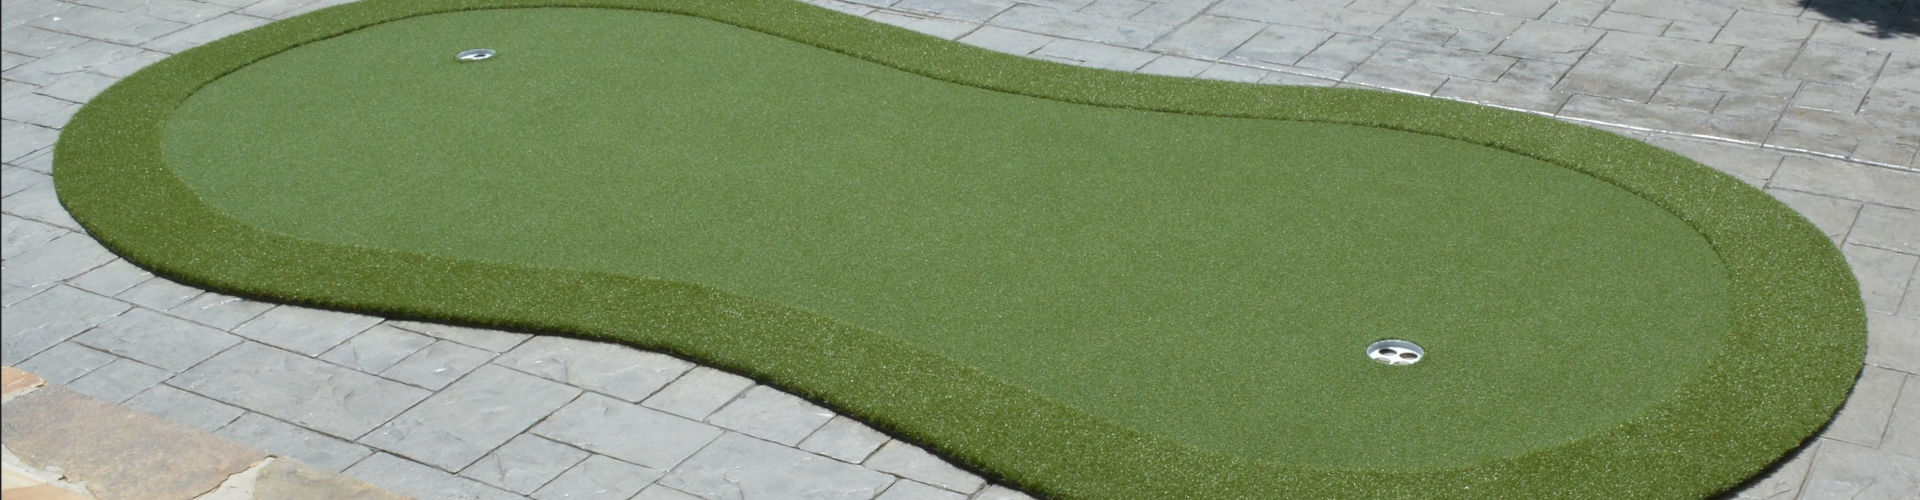 Southwest Greens Portable Putting Green